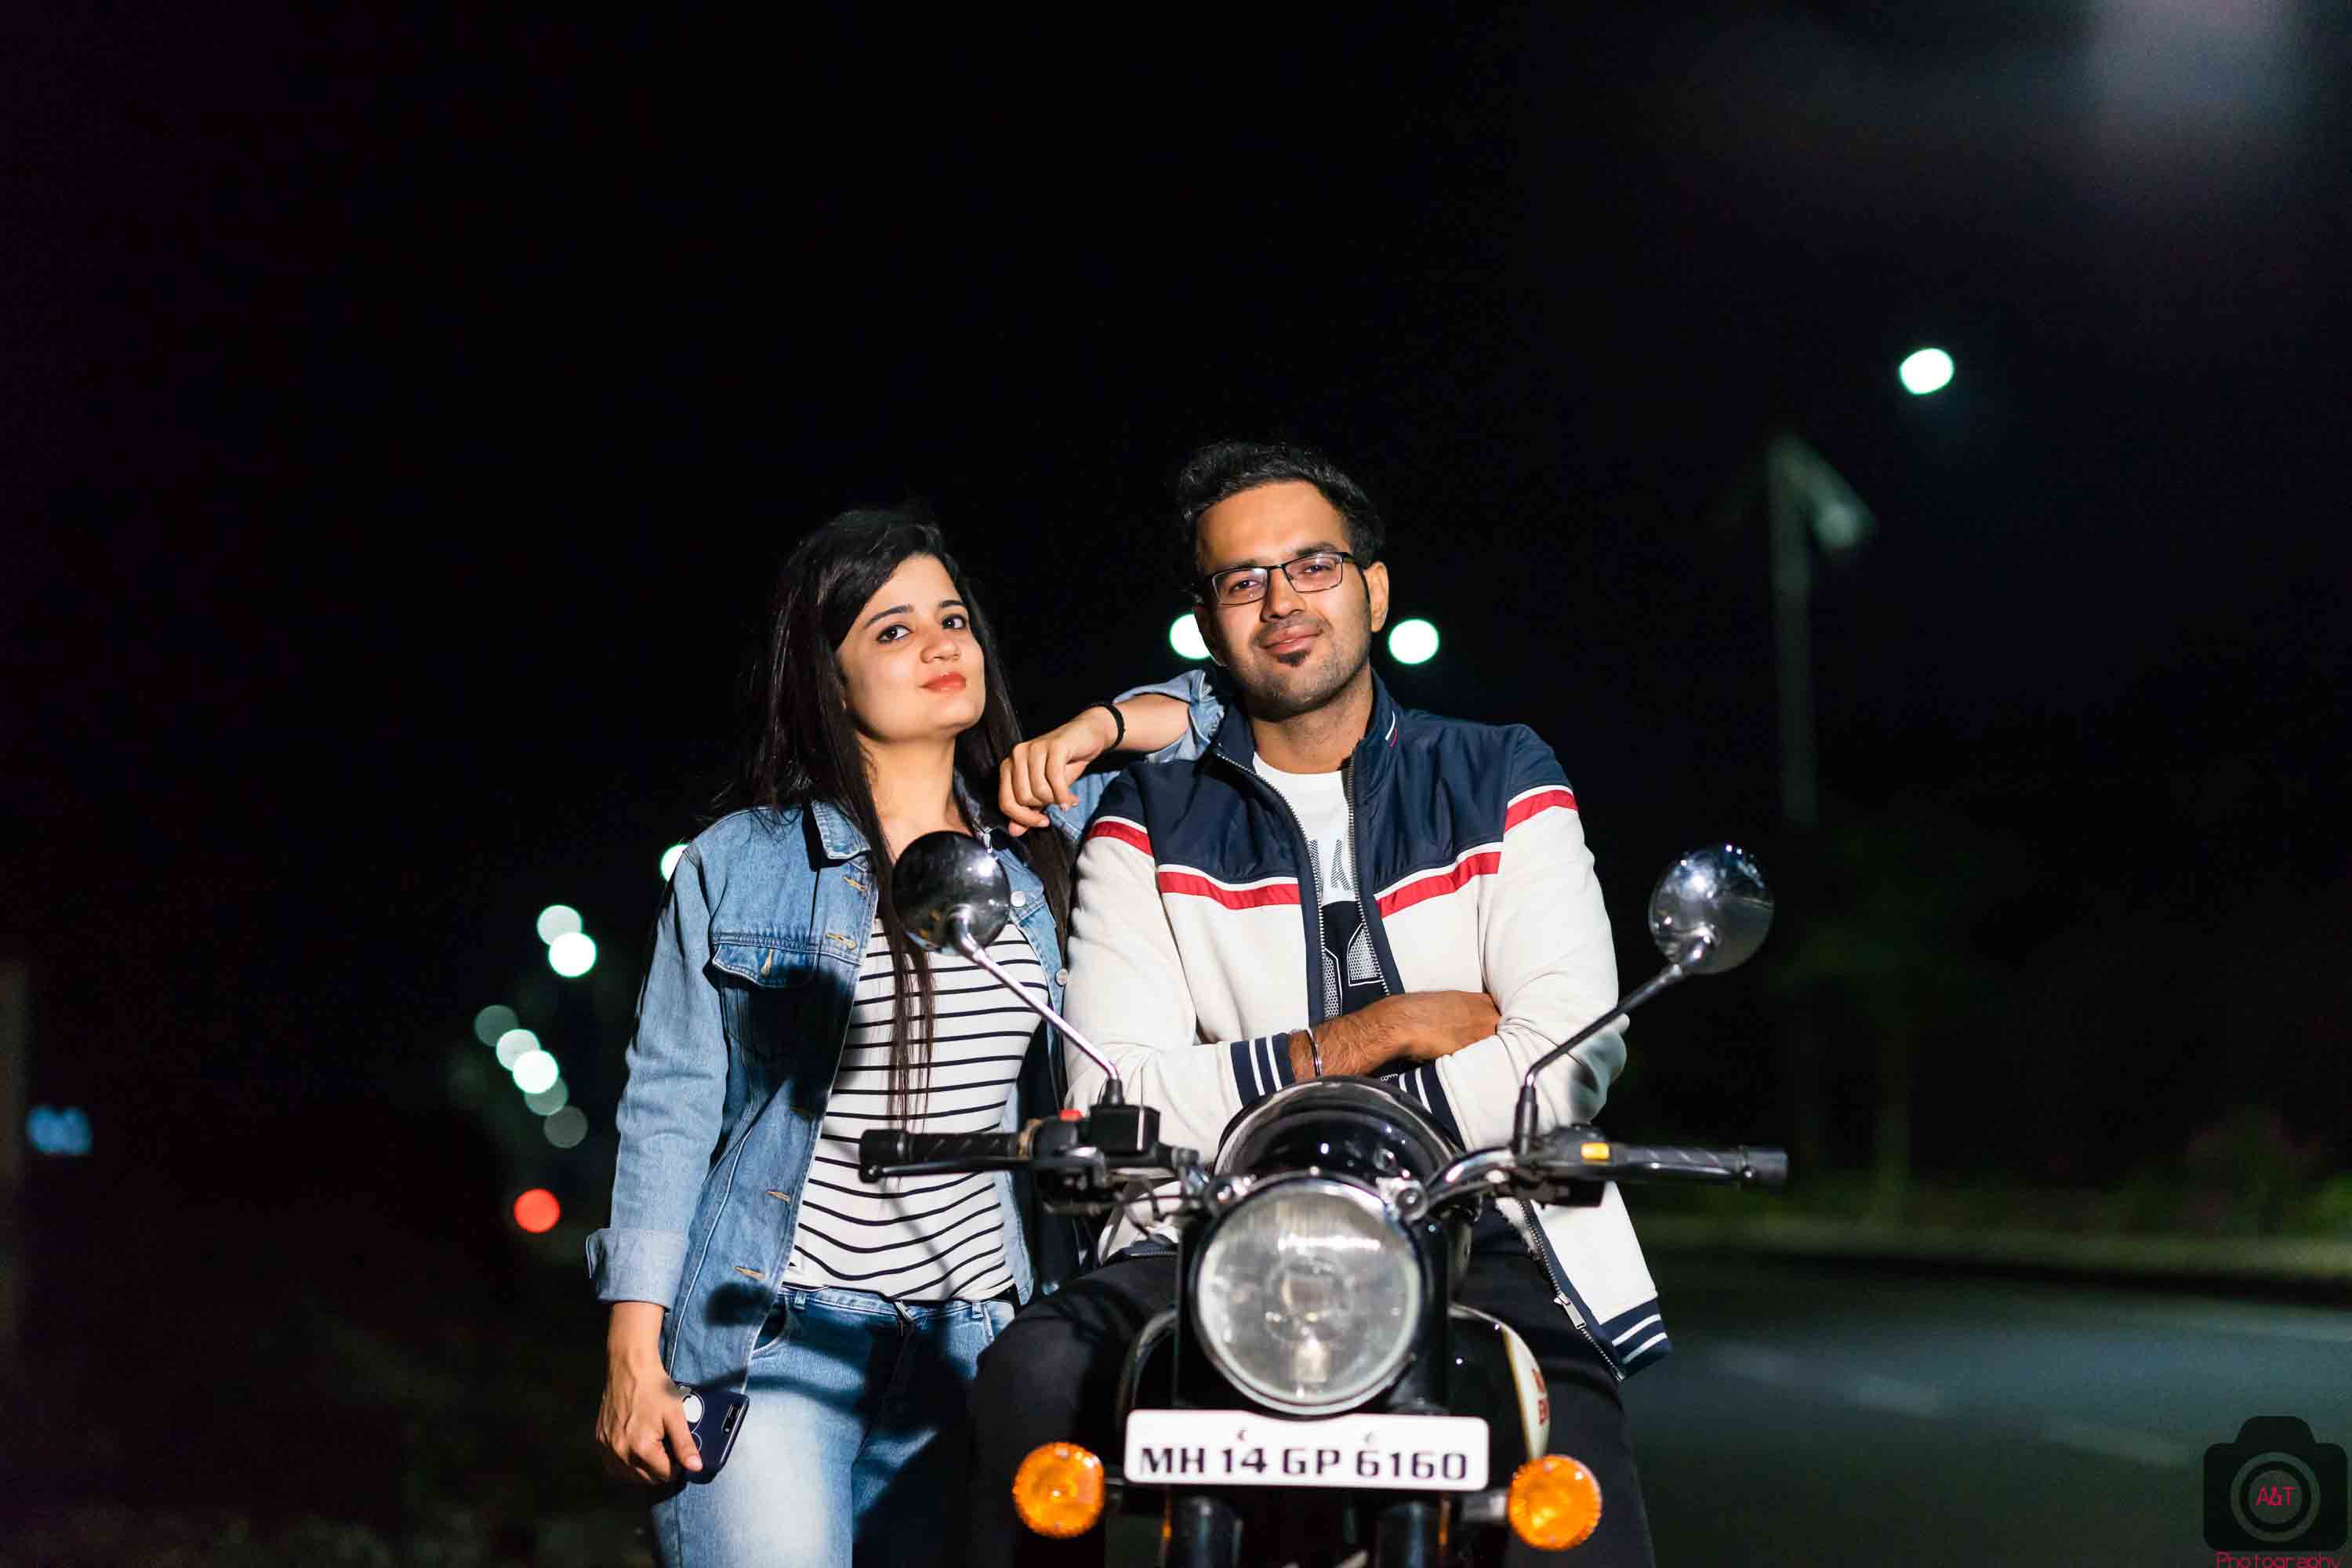 Conceptual Pre-wedding on Bullet| Shilpa & Pulkit| A&T Photography-Pre-wedding Photographer in Pune, India